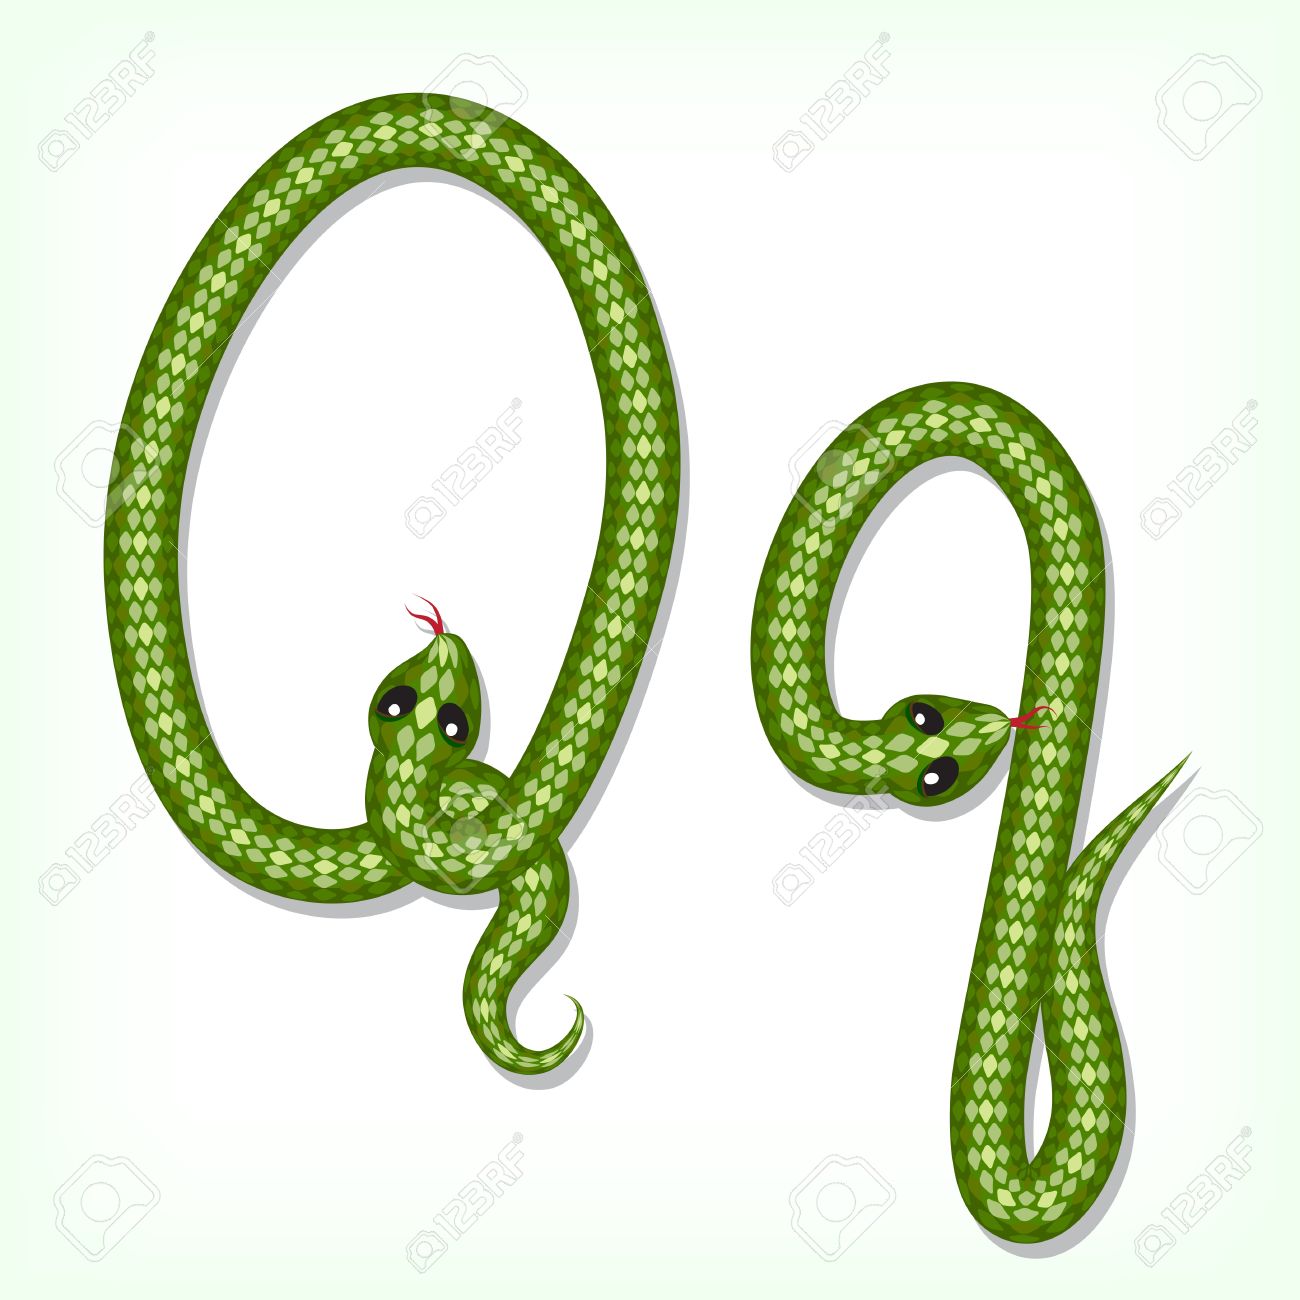 Smooth Green Snake clipart #7, Download drawings